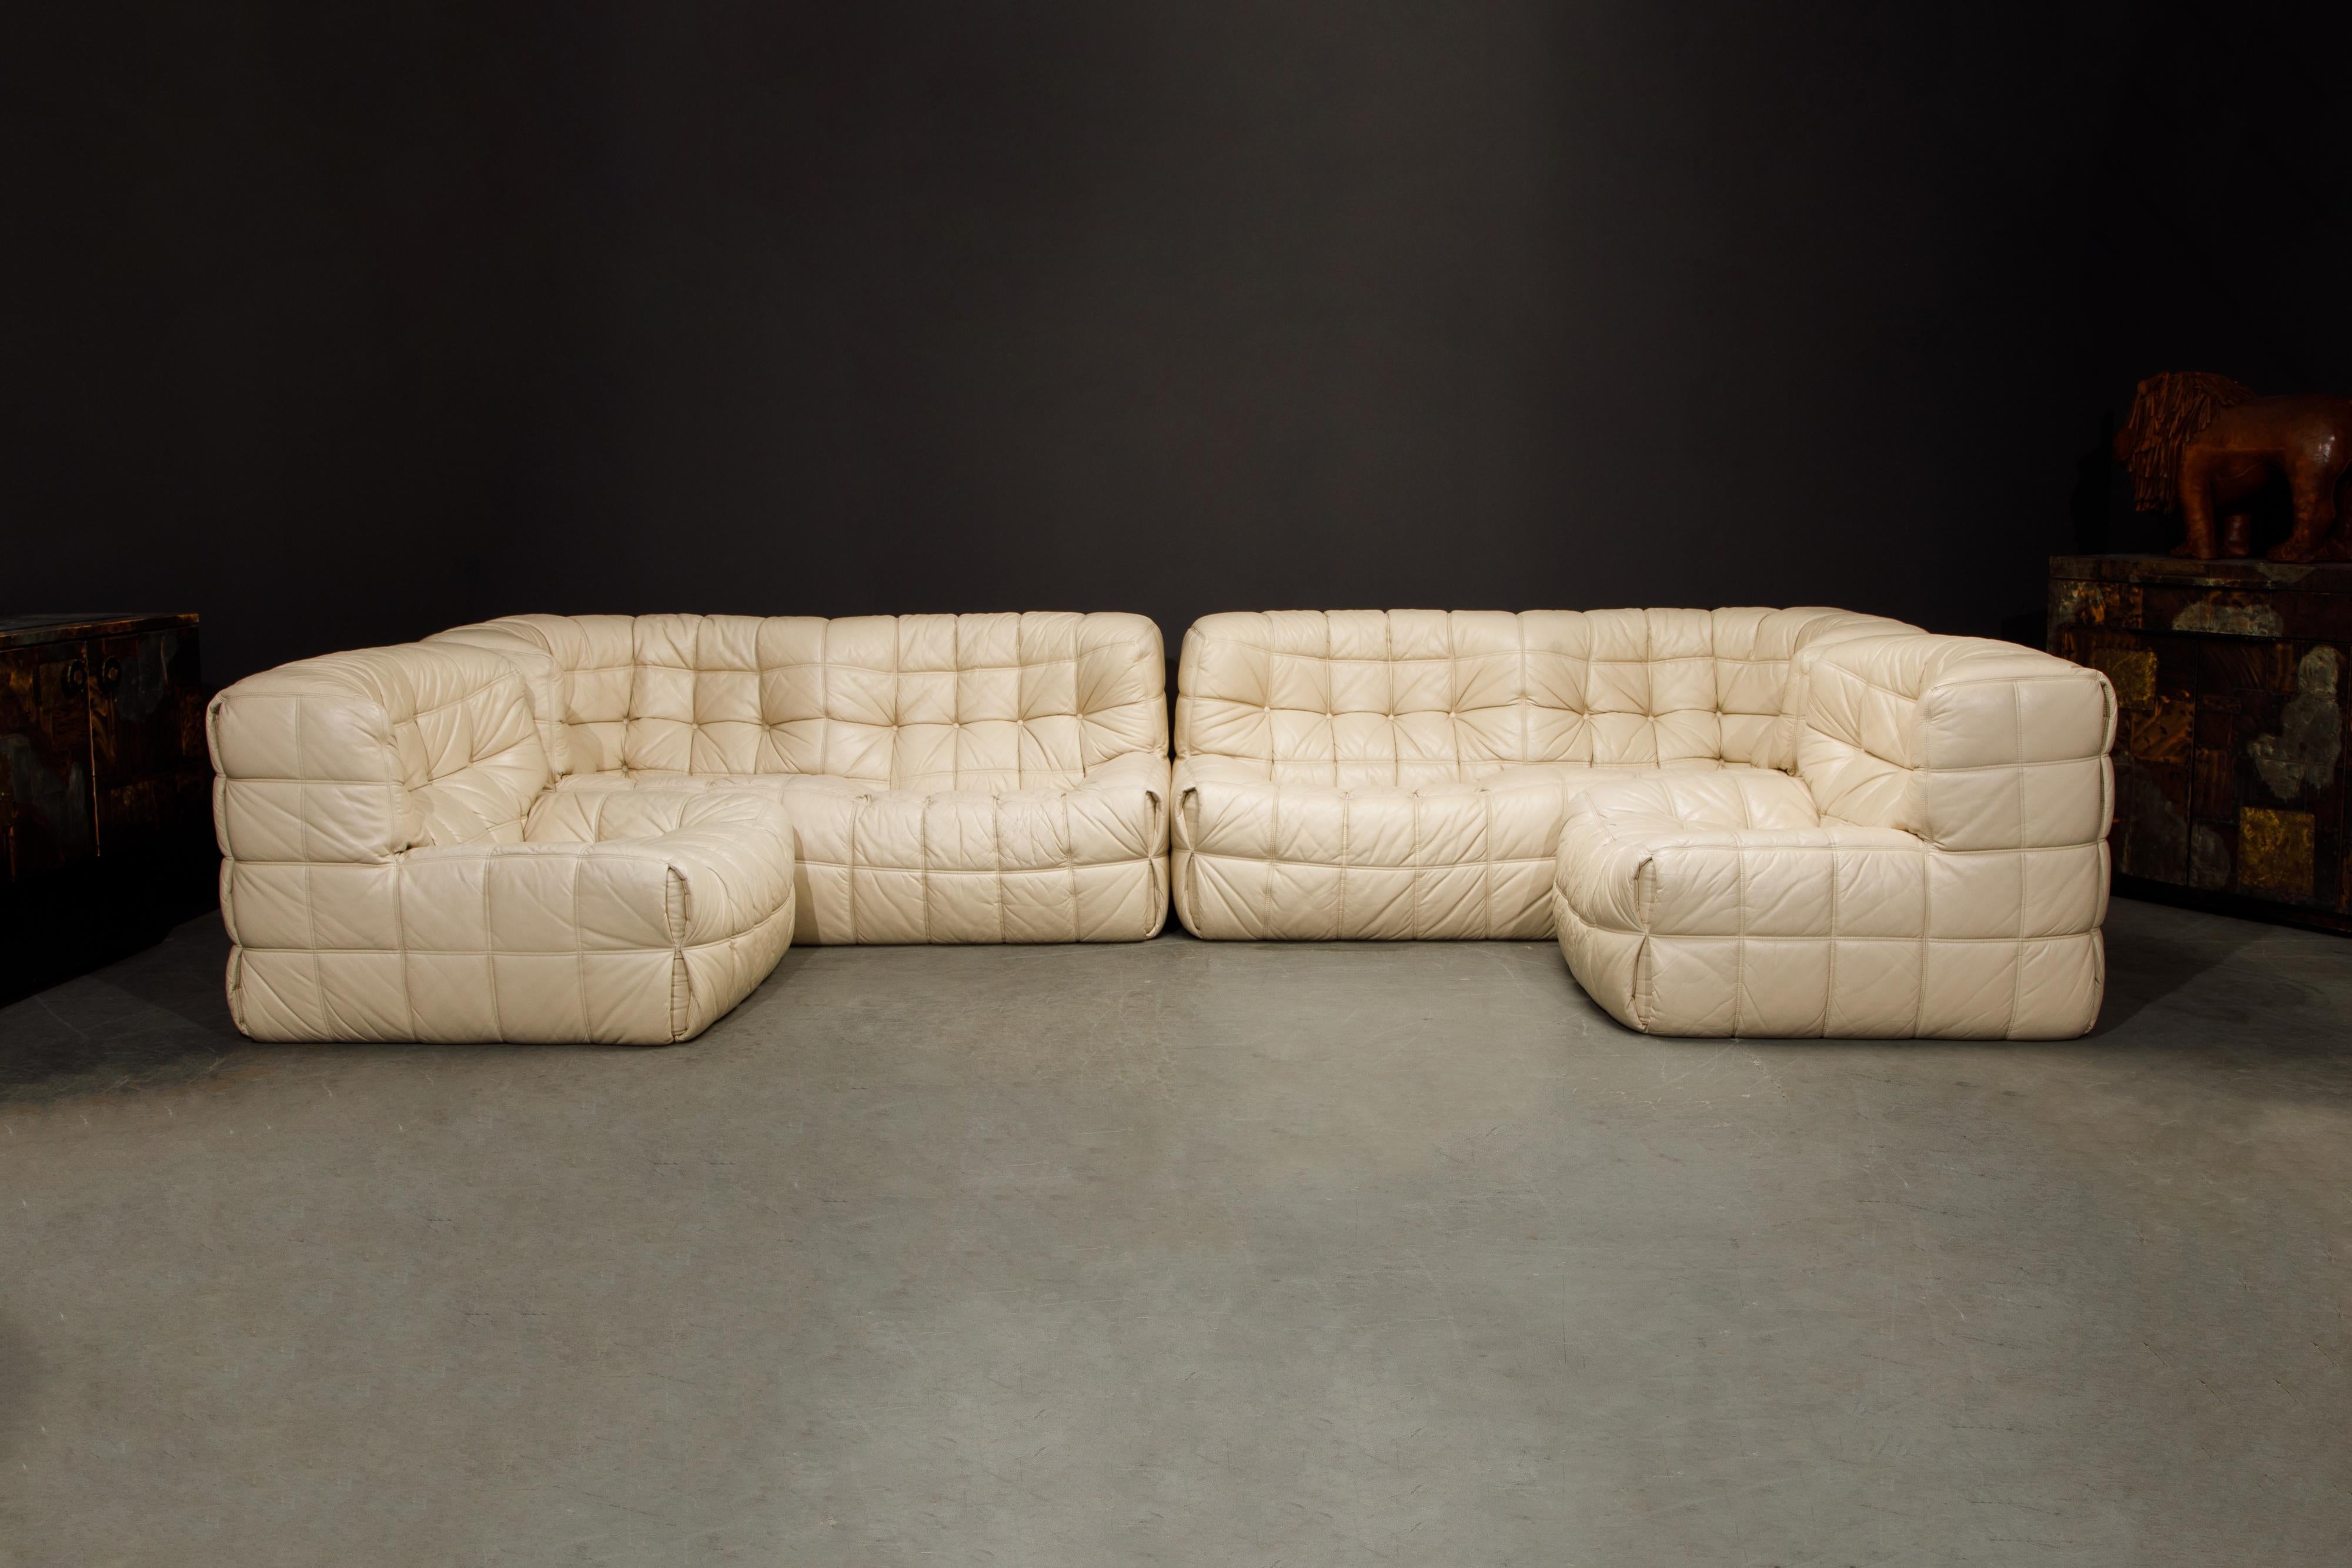 French 'Kashima' Leather Sectional by Michel Ducaroy for Ligne Roset, c. 1976, Signed